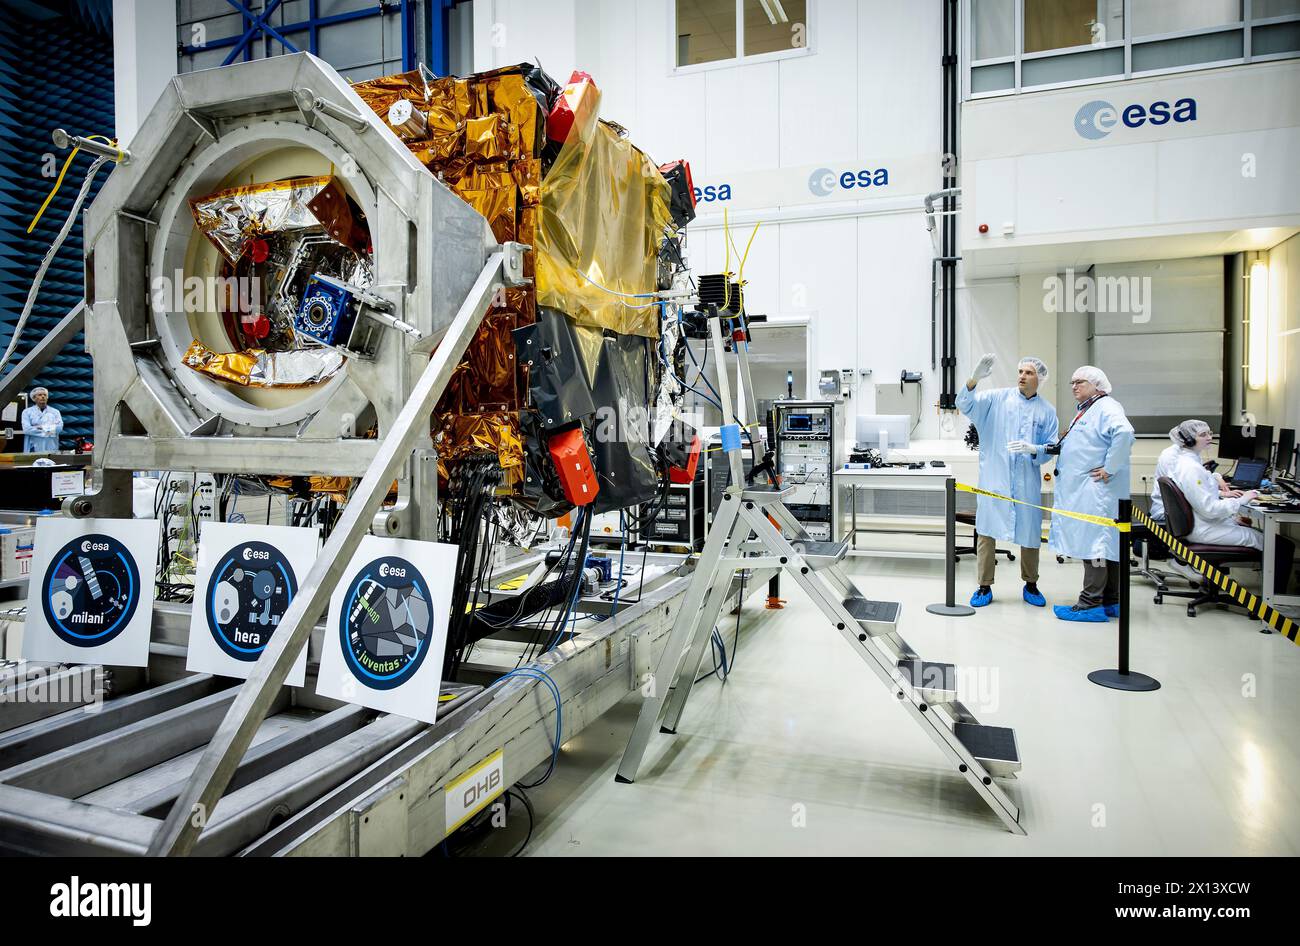 NOORDWIJK - The Hera spacecraft in a cleanroom of the European Space Research and Technology Center (ESTEC). ESA's spacecraft will investigate the deflection of asteroids as part of a planetary defense mission called Hera. ANP KOEN VAN WEEL netherlands out - belgium out Stock Photo